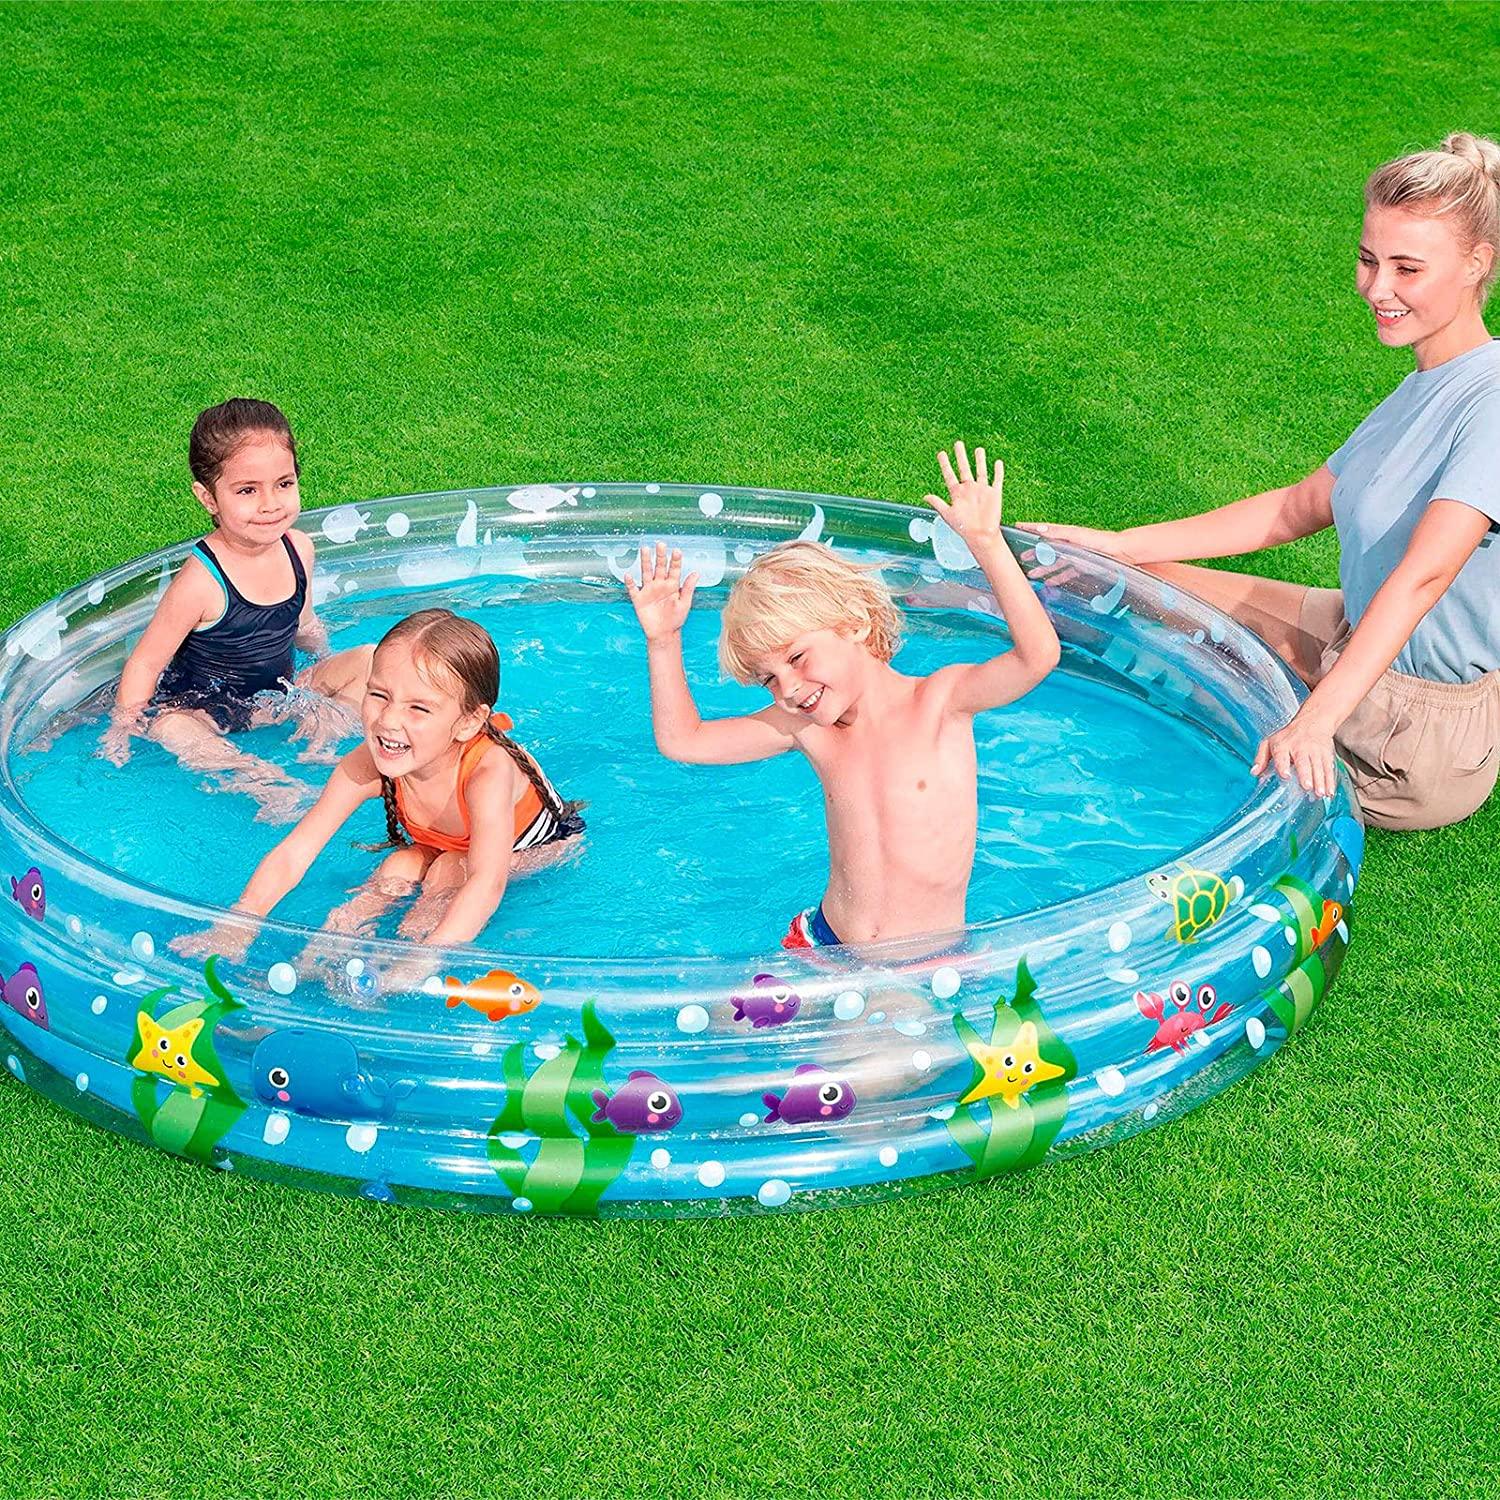 Bestway 51005 Deep Dive 3-Ring Pool - BumbleToys - 5-7 Years, Boys, Girls, Sand Toys Pools & Inflatables